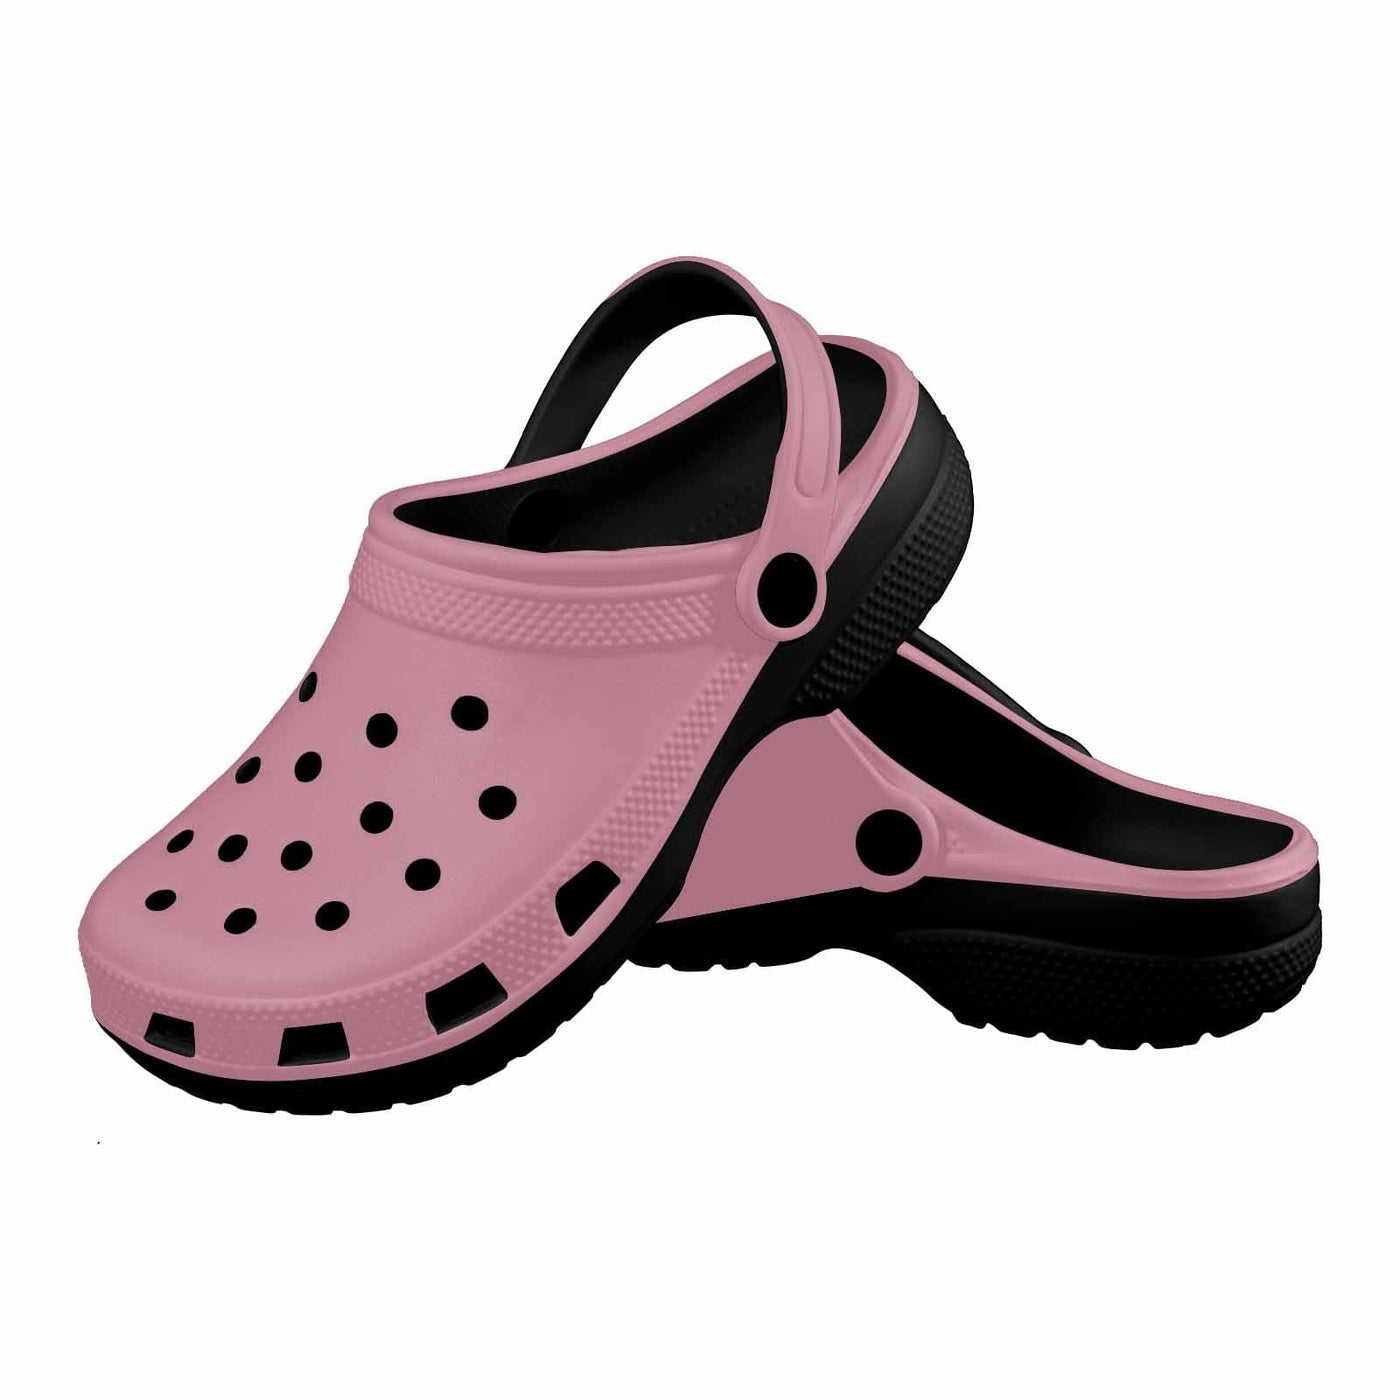 Puce Red Adult Clogs - Unisex | Clogs | Adults